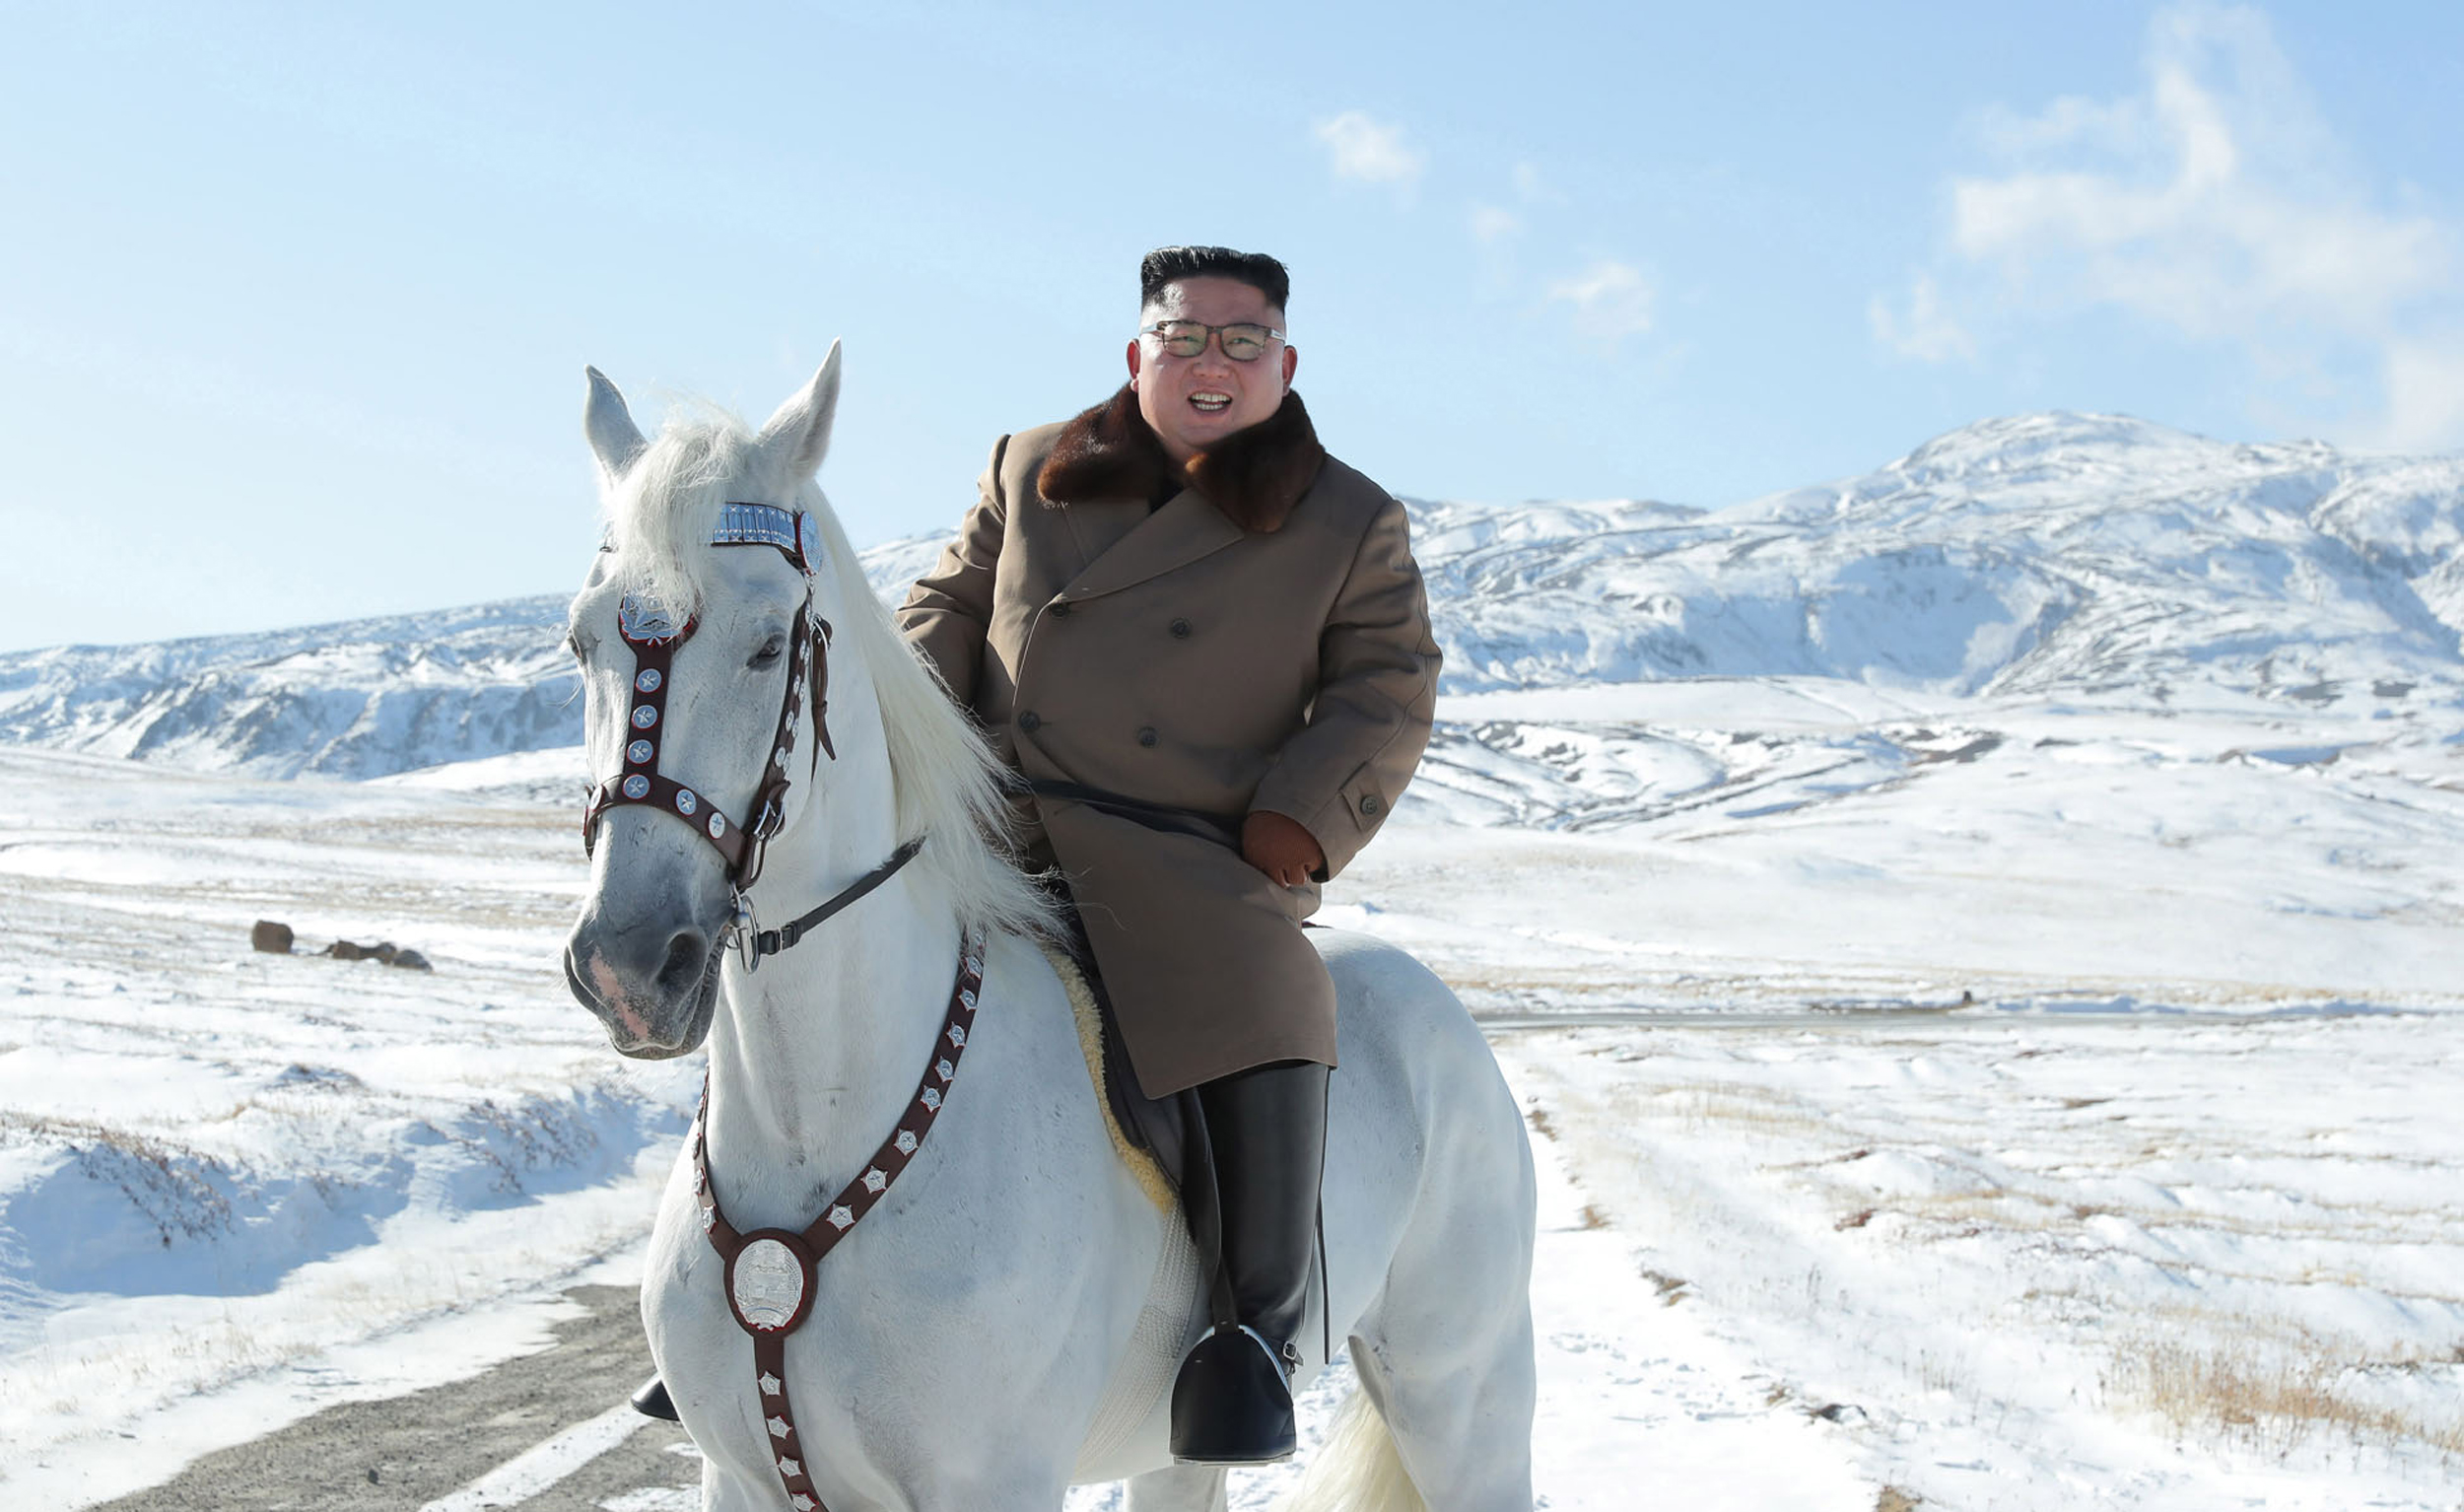 North Korean leader Kim Jong Un rises a white horse in the first snow at Mouth Paektu in this undated picture released last week. Vessels involved in the North's export of coal, which is banned under U.N. resolutions, have made repeated port calls in Japan, a report said Sunday. | KCNA / VIA AFP-JIJI